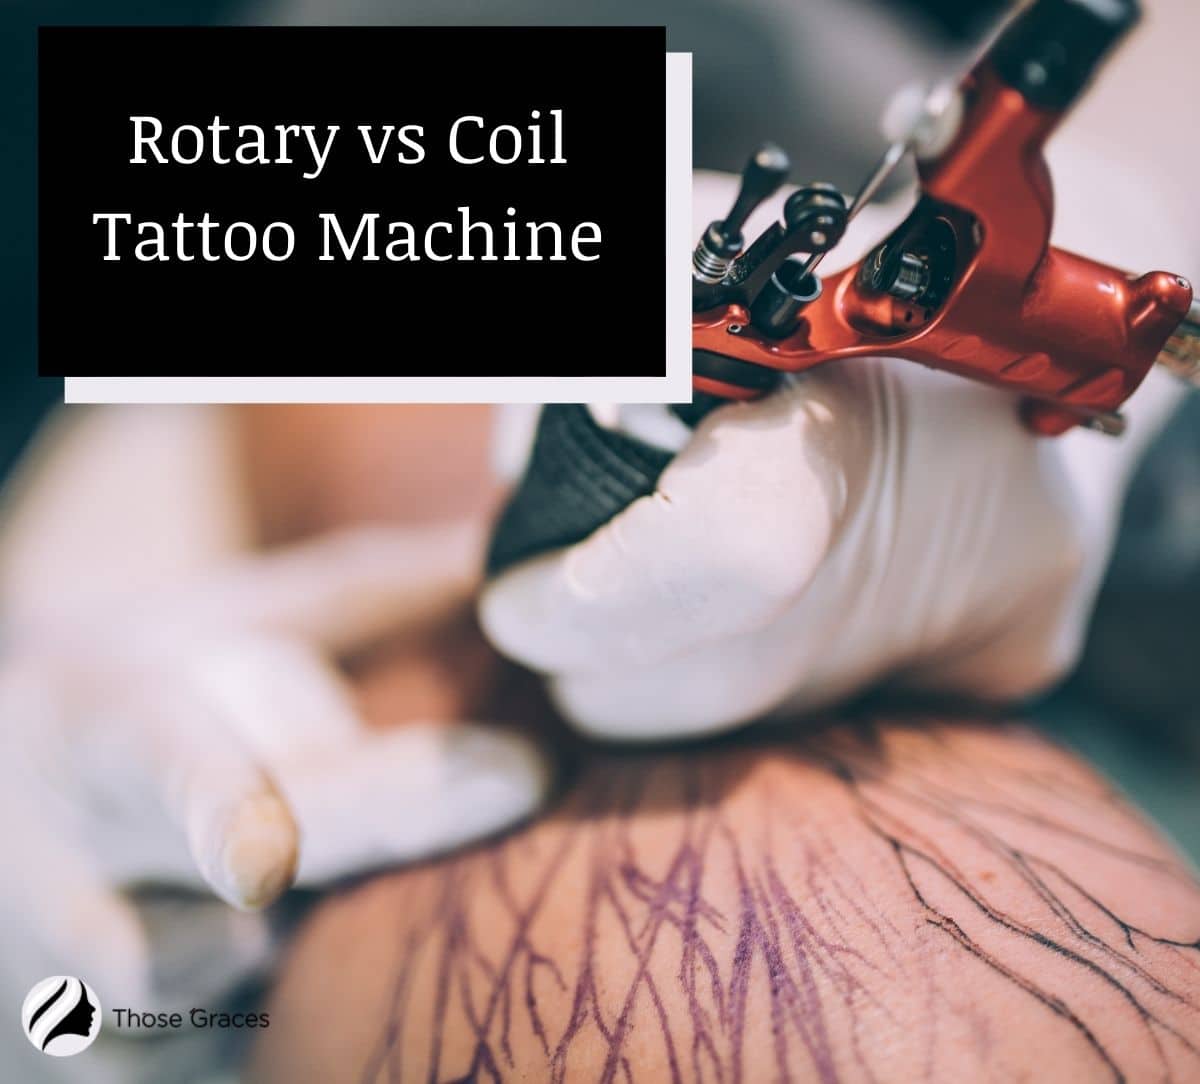 Rotary vs Coil Tattoo Machine for Beginners (Comparison Guide)